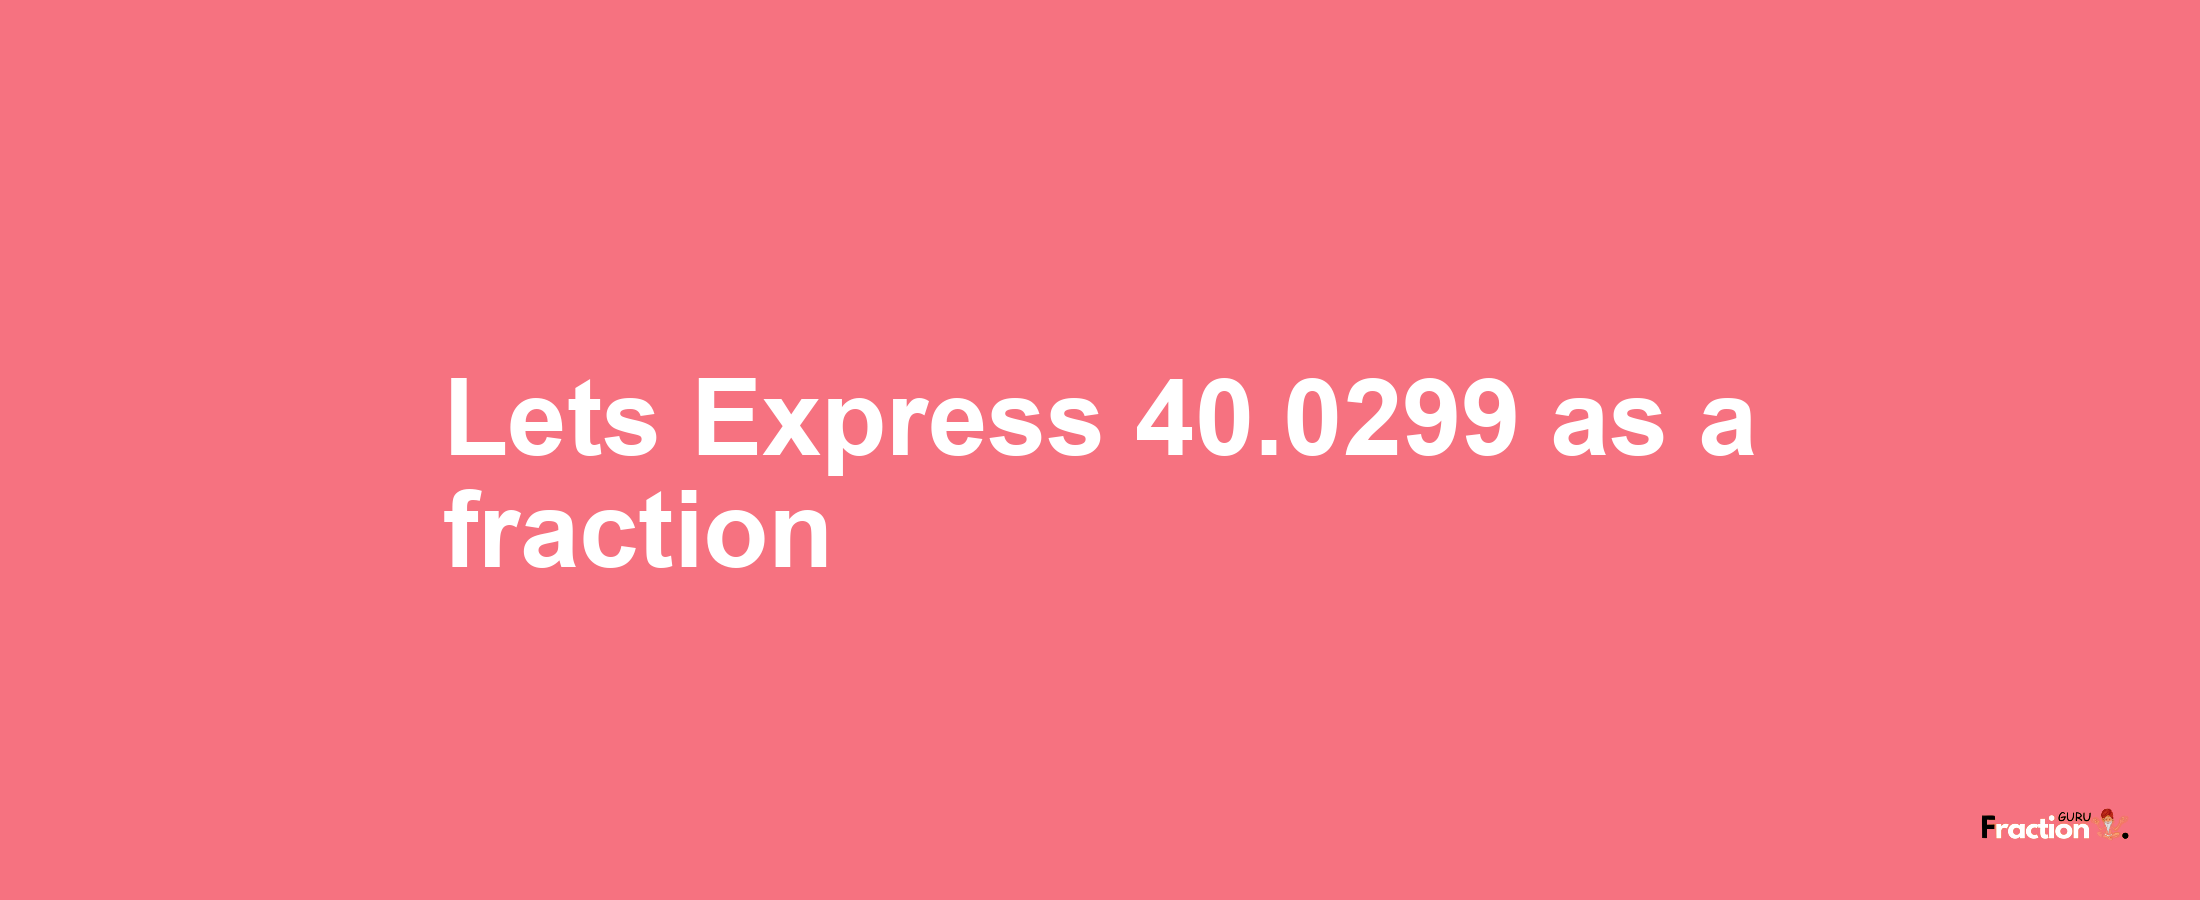 Lets Express 40.0299 as afraction